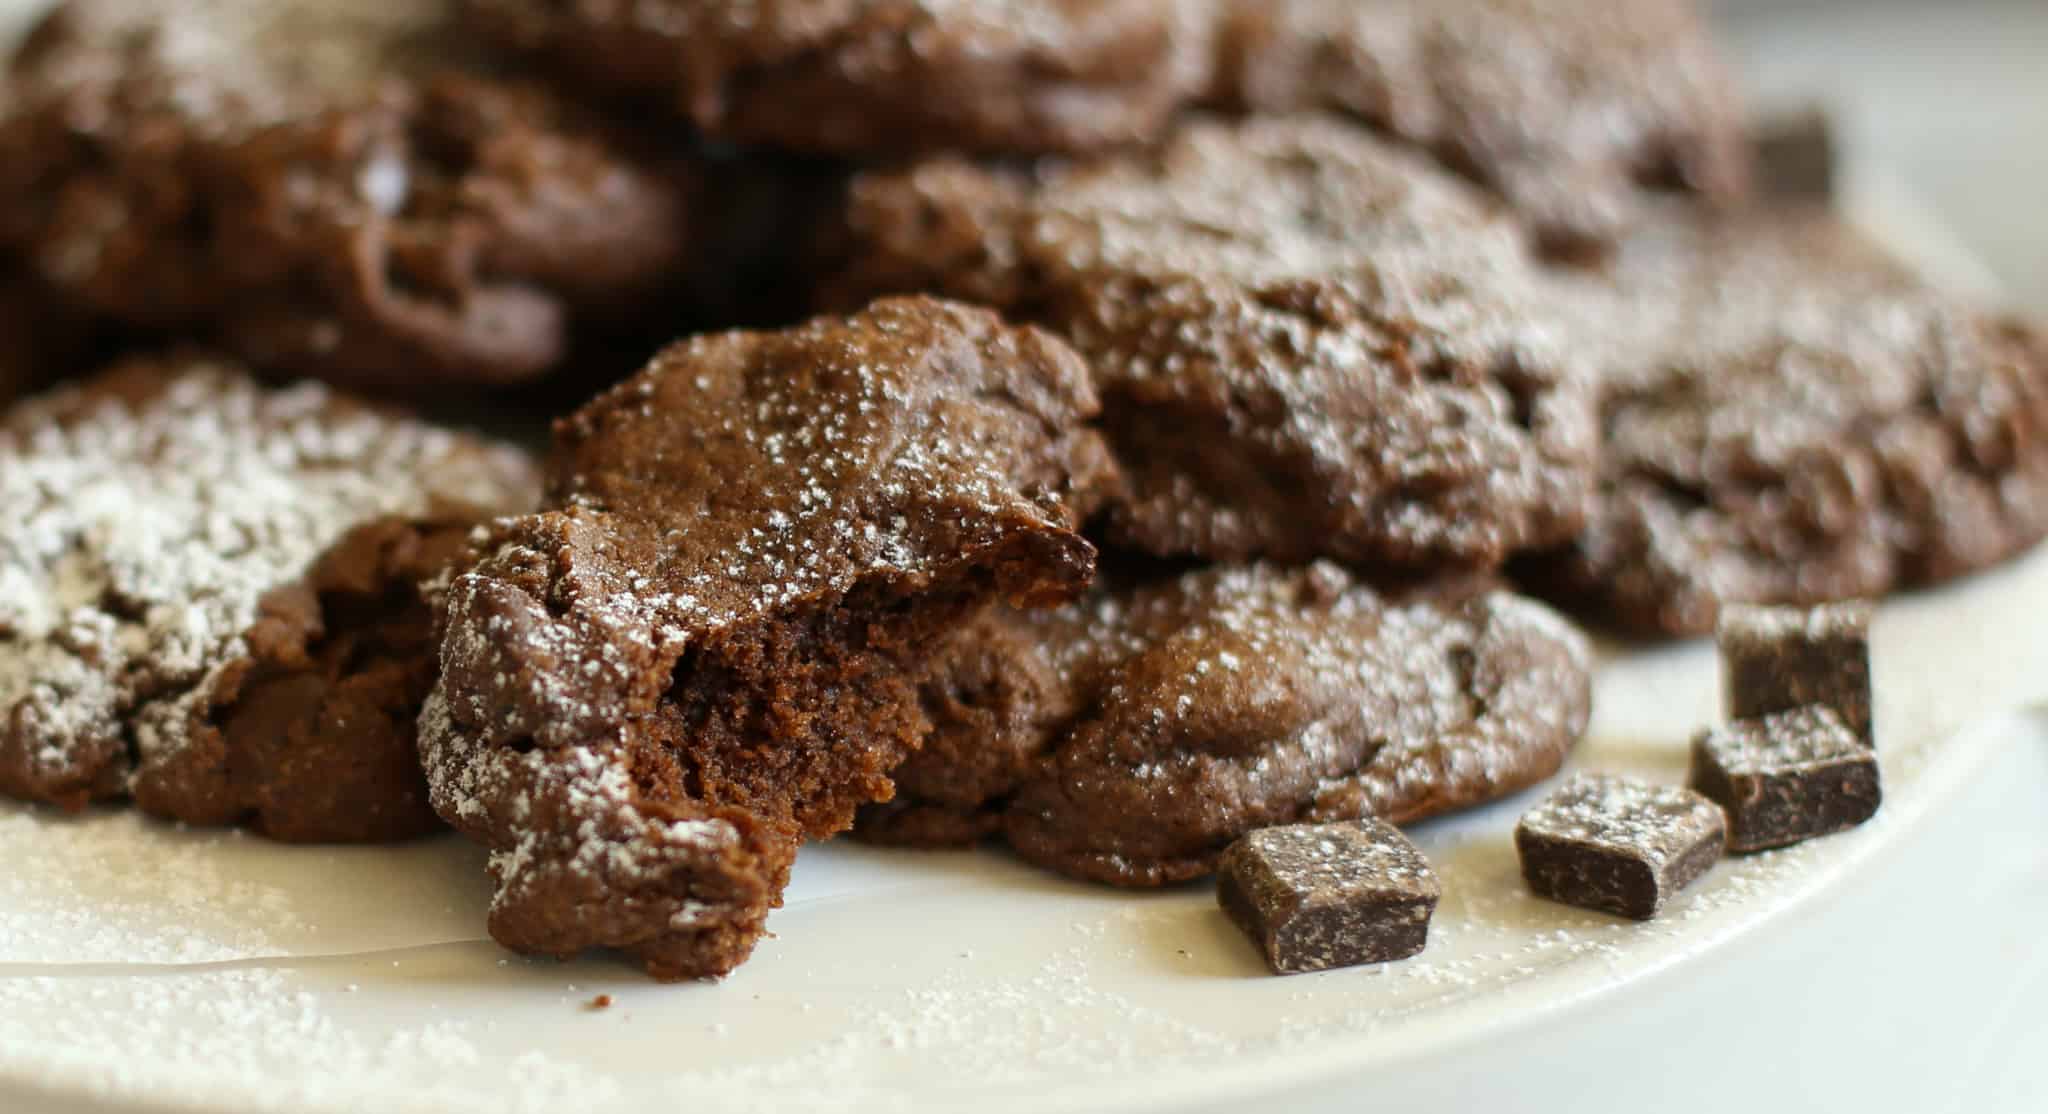 A dark chocolate coffee cookie broken in half sitting in front of a plate of cookies.